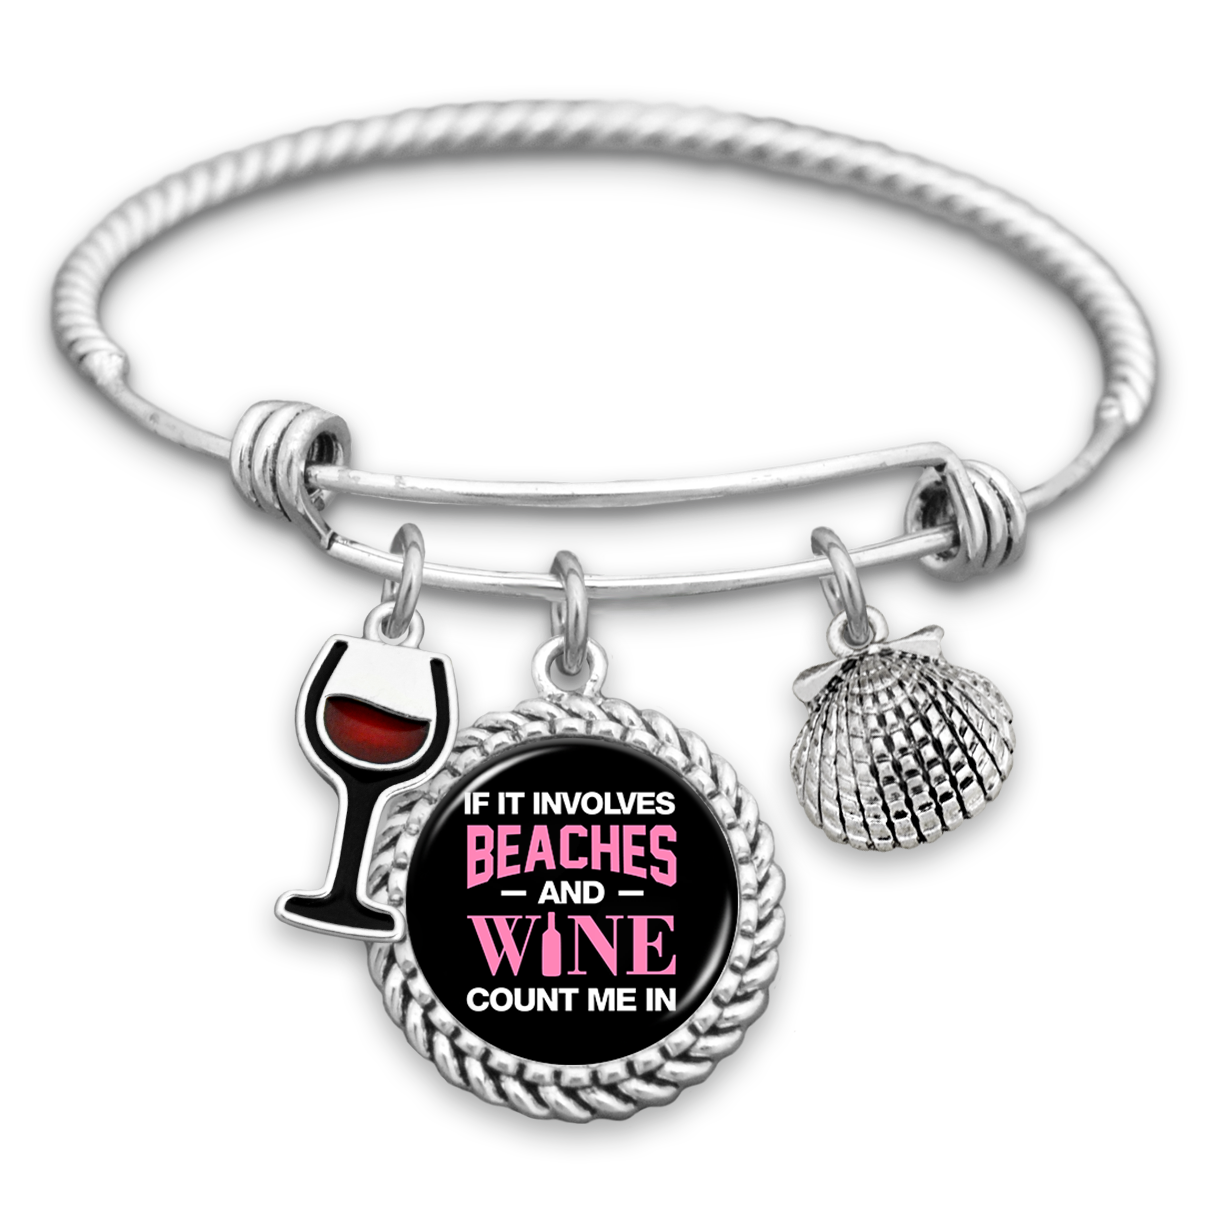 If It Involves Beaches And Wine, Count Me In Charm Bracelet